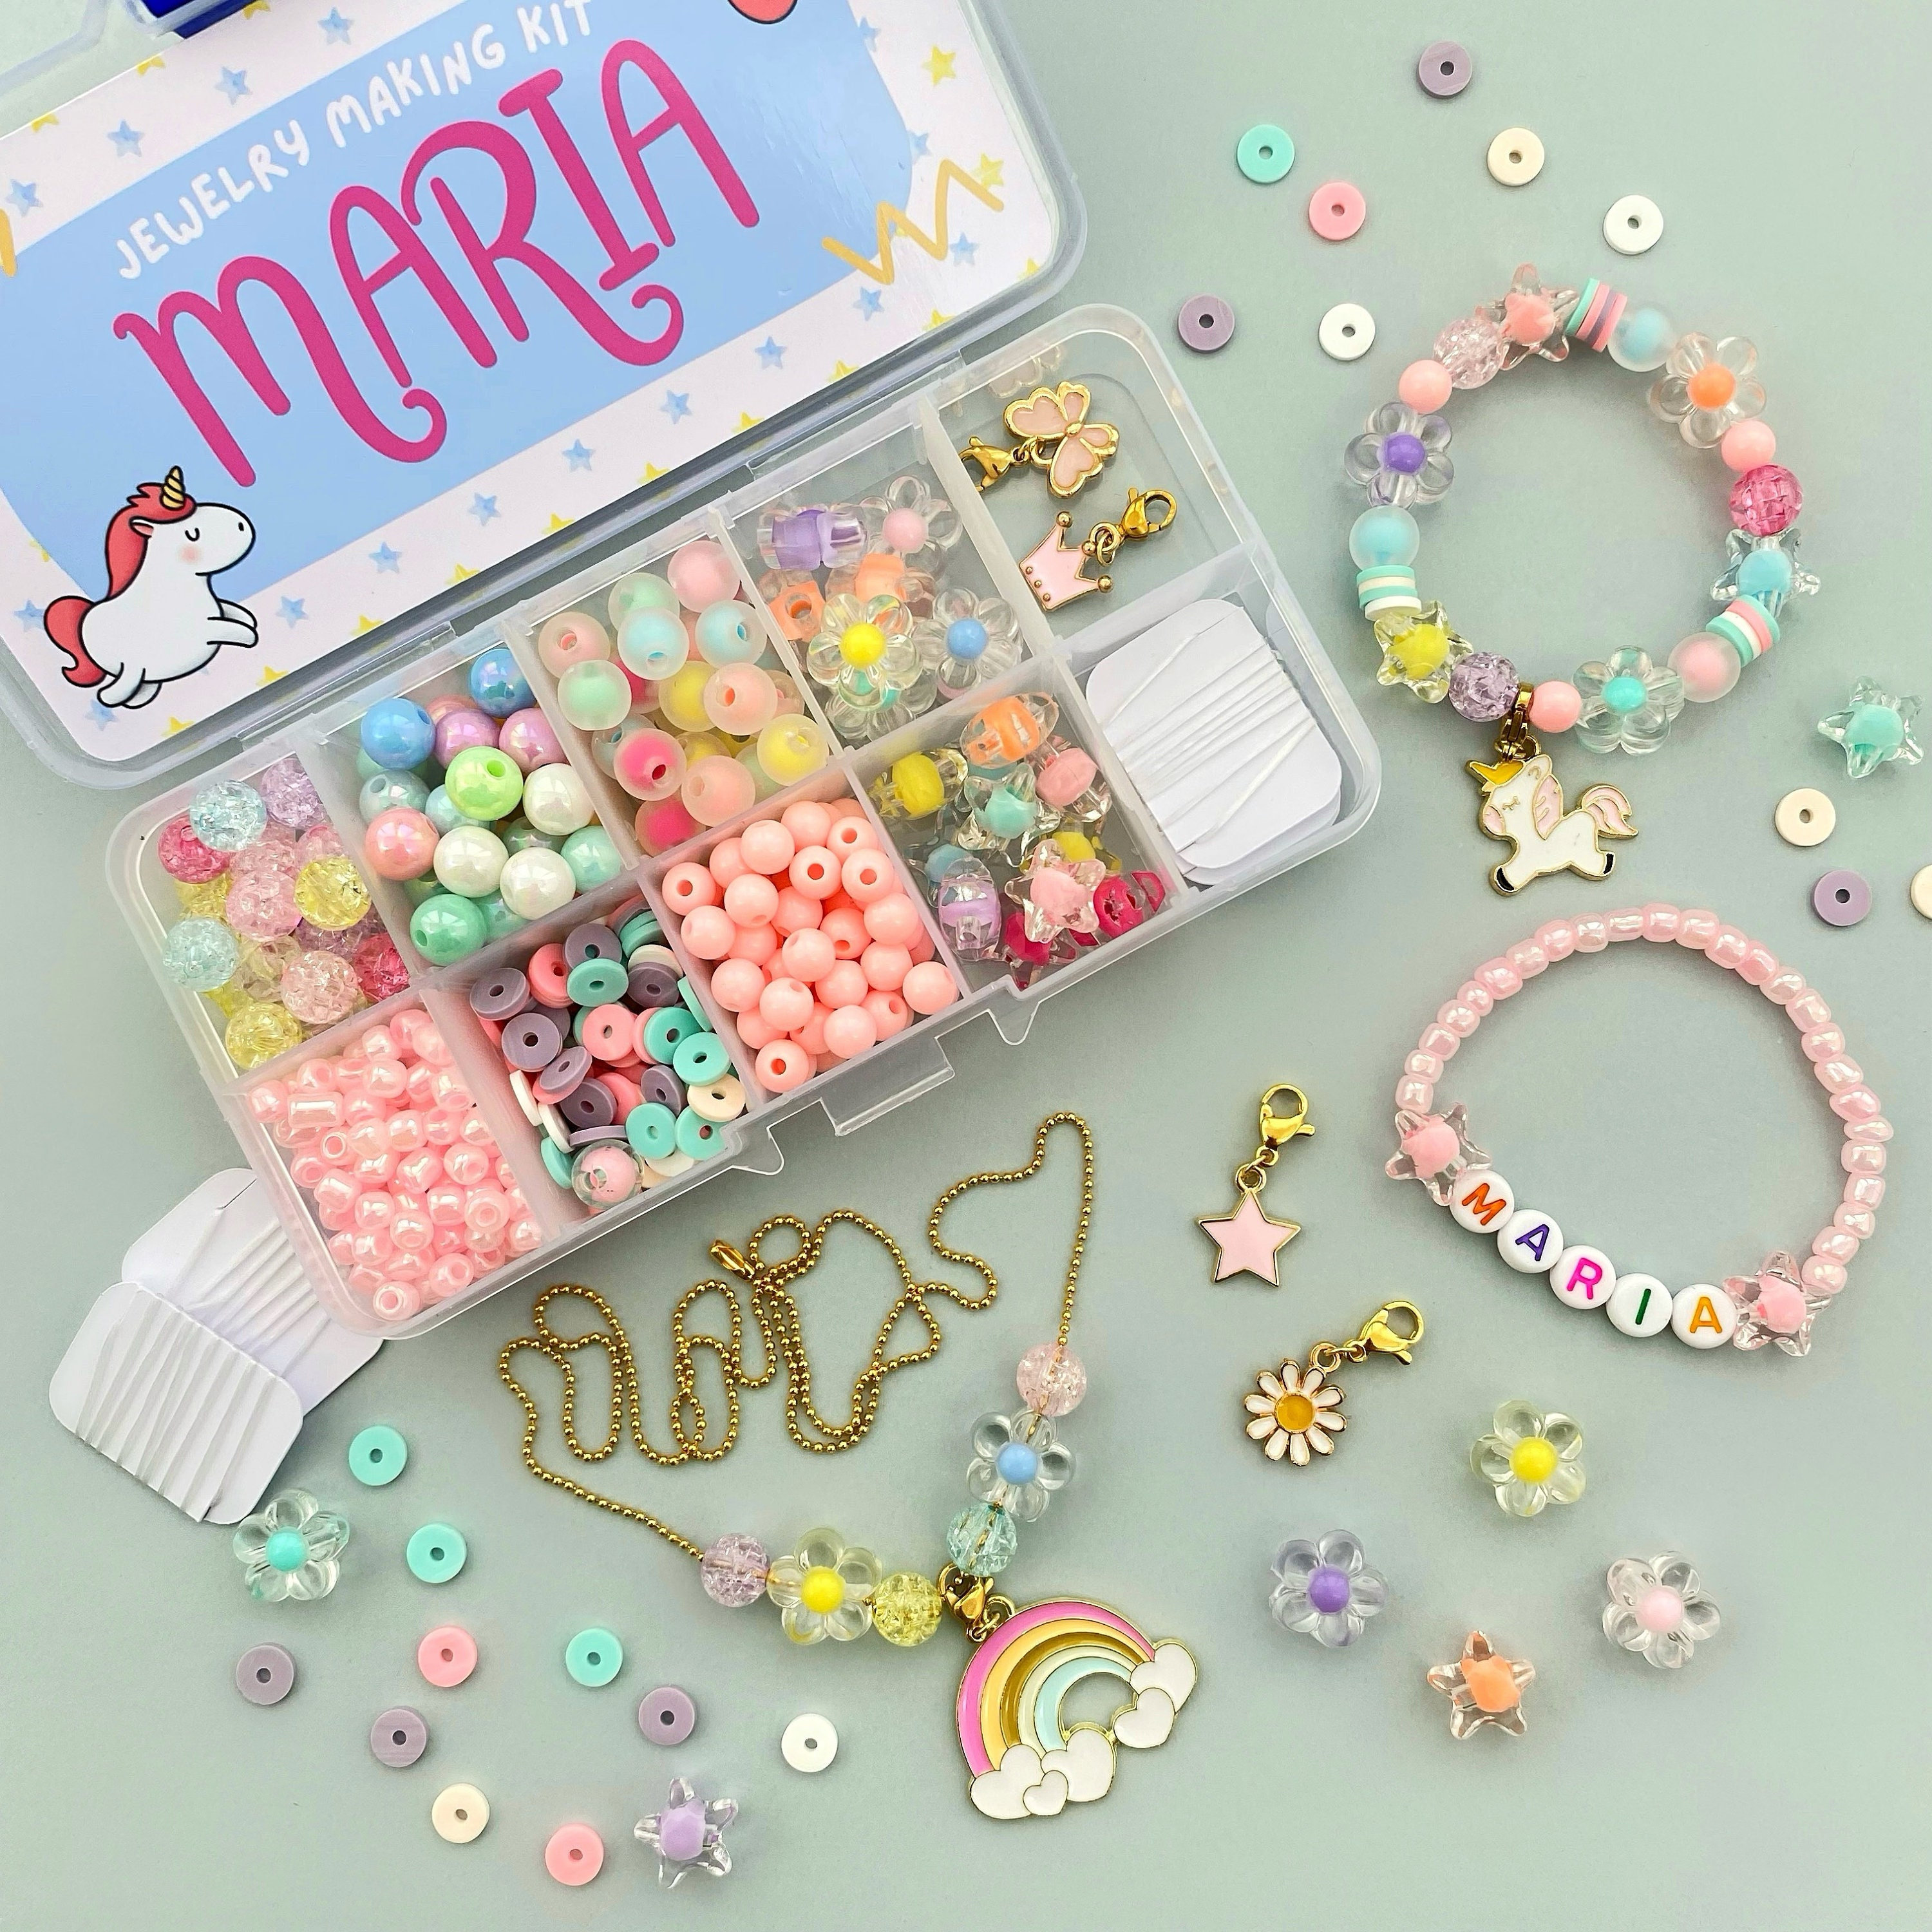 DIY Little Girl Bracelets Making Kit Girl Party Activity Box Craft  Personalized Jewelry Making Kit for Girls DIY Stretchy Name Bracelet -   Norway